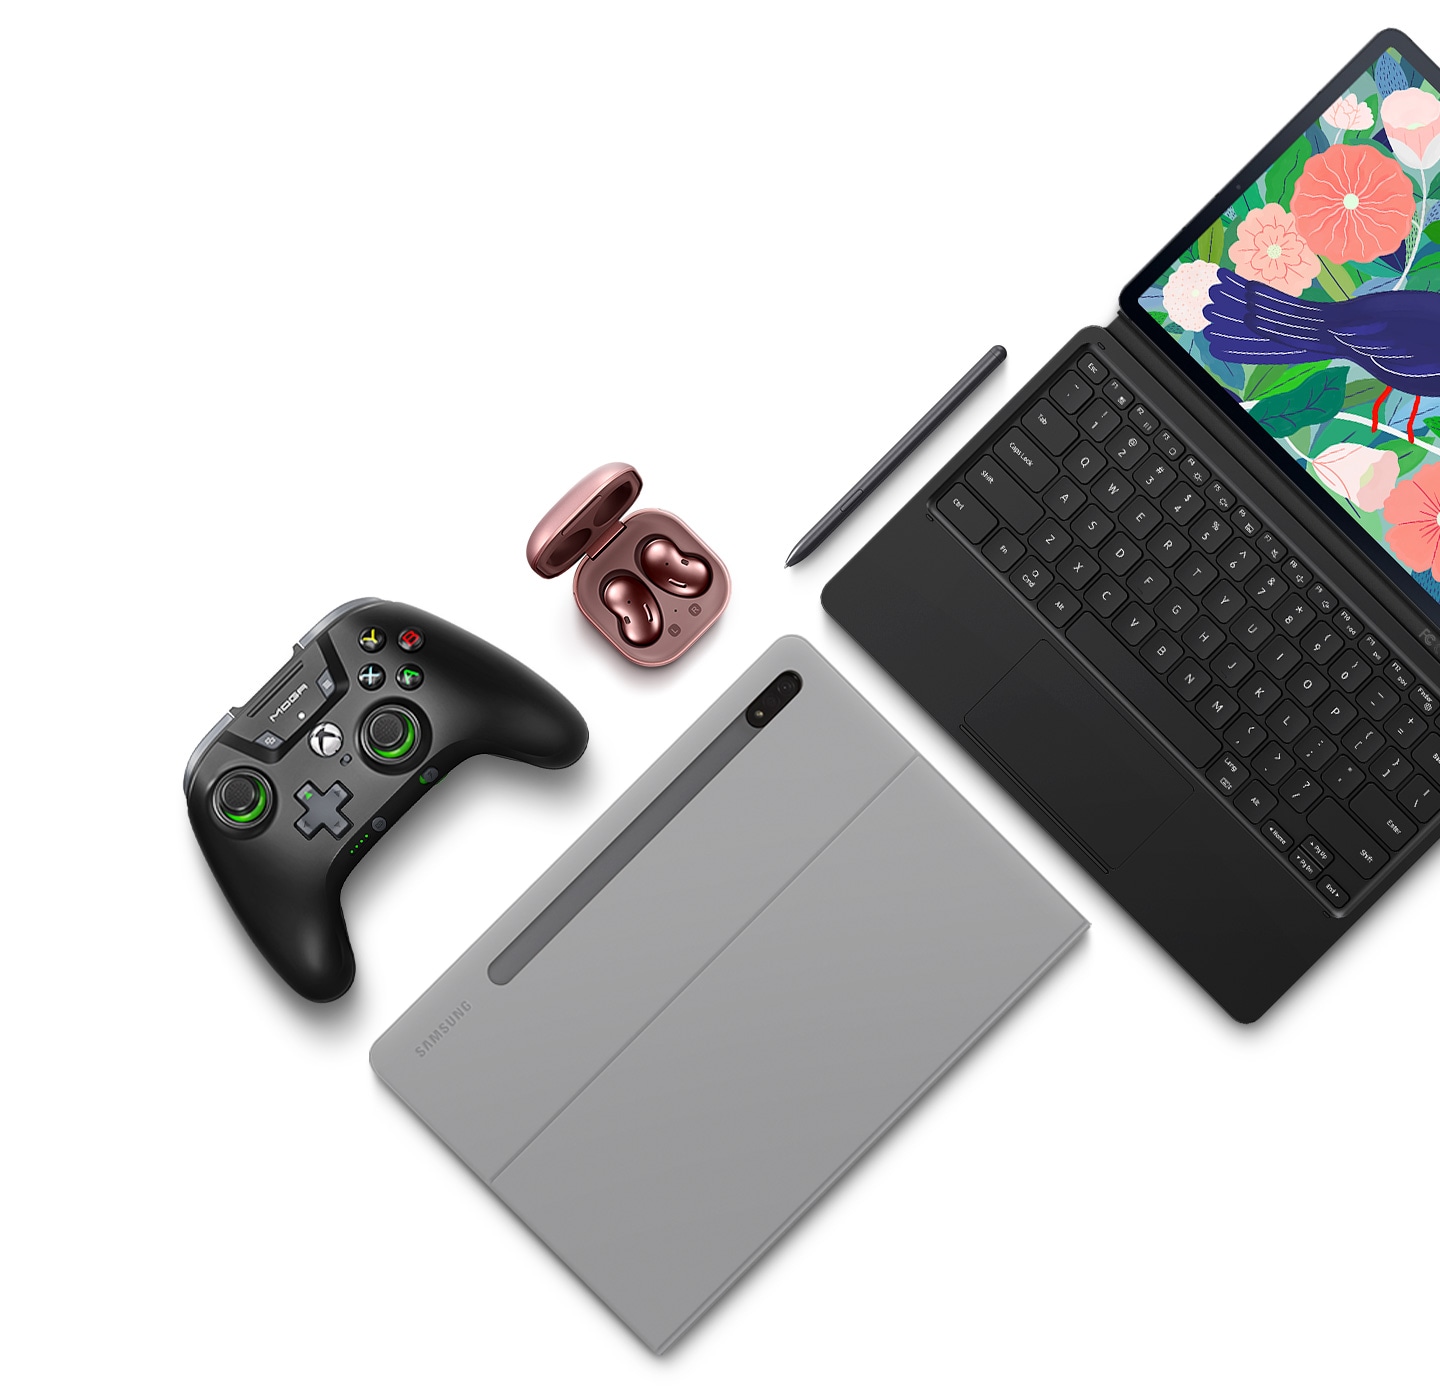 Flat lay of Galaxy Tab S7+ and its accessories. A Galaxy Tab S7+ attached to the BookCover Keyboard, a Galaxy Tab S7+ inside the BookCover, S Pen, game controller, and Galaxy Buds Live